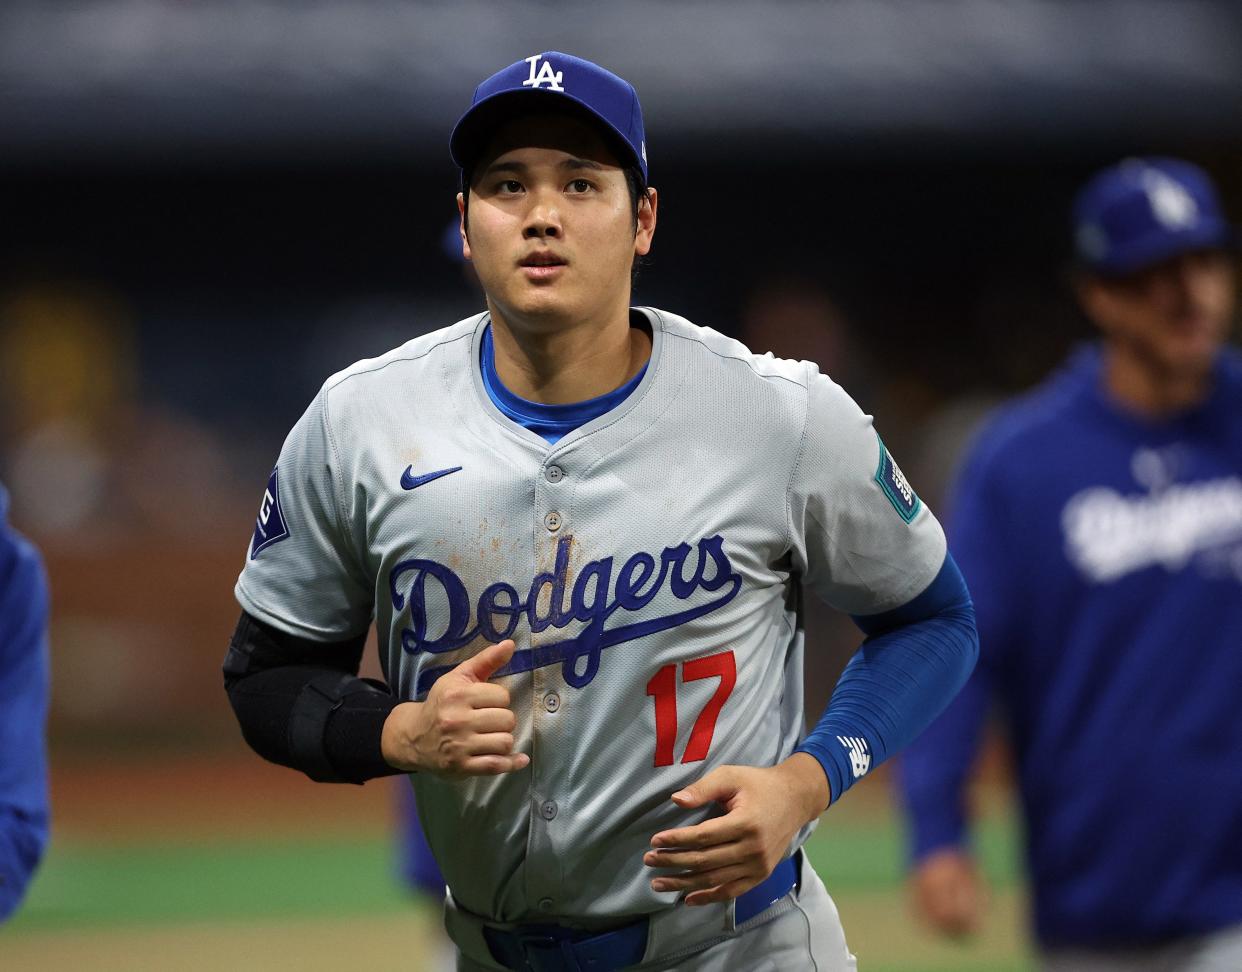 Shohei Ohtani and the Dodgers opened the season playing the Padres in South Korea.